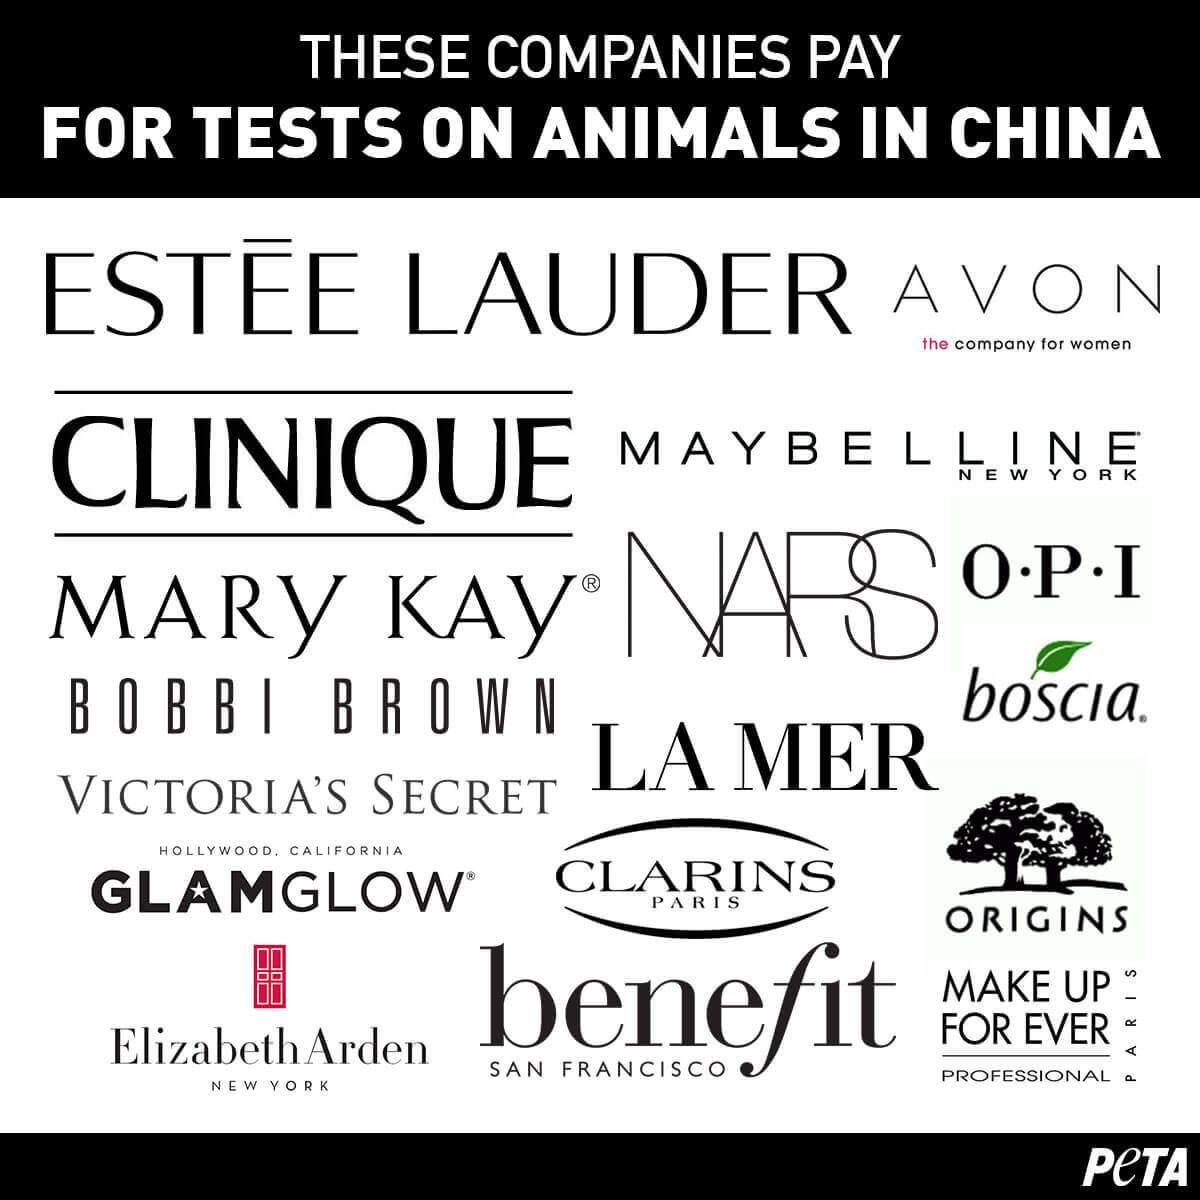 What beauty brands test on animals